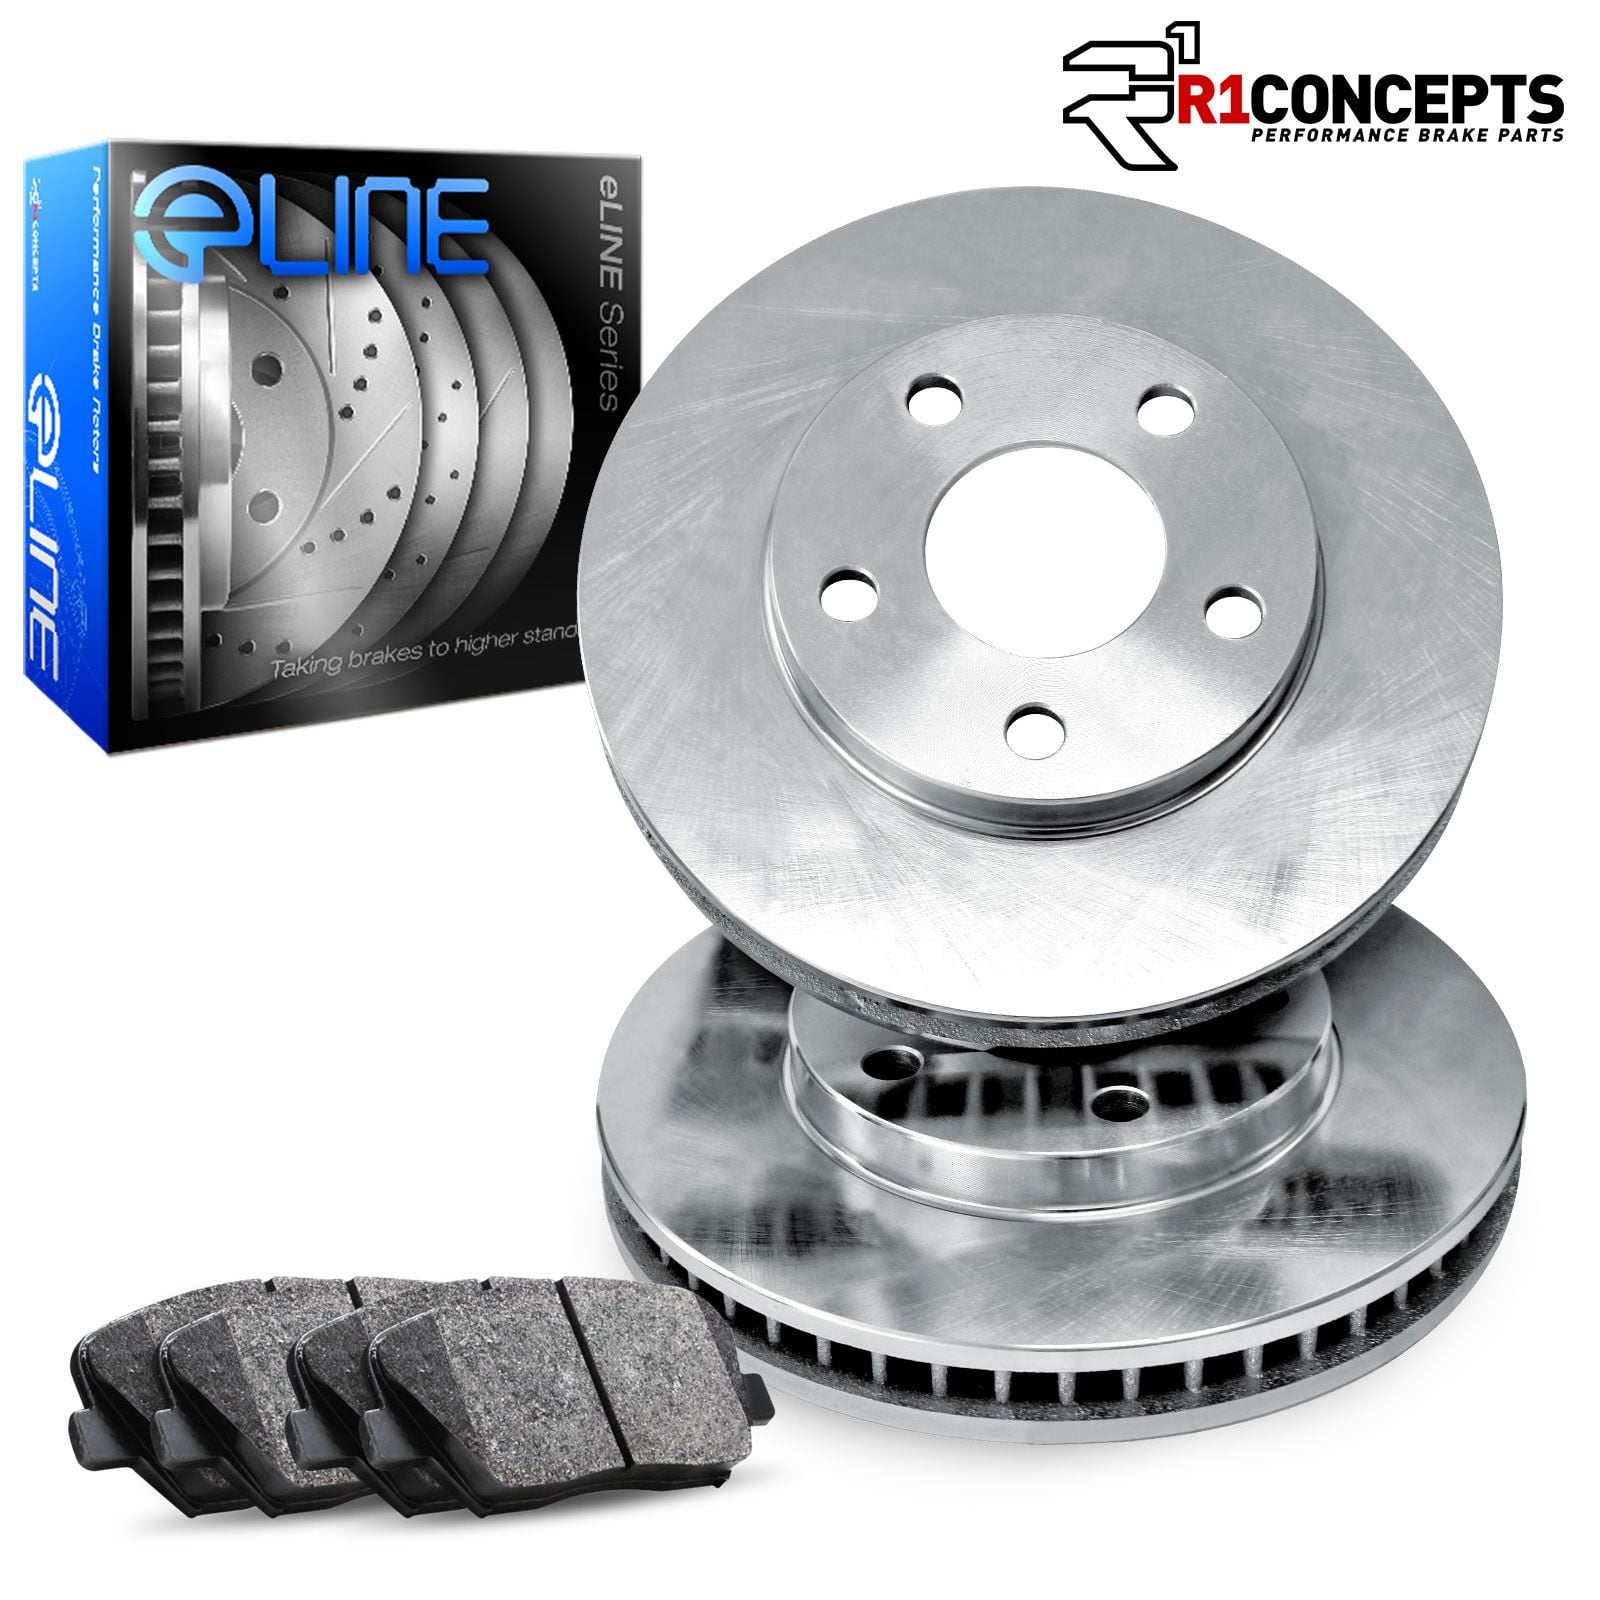 Stirling 2011 For Ford Escape Front Disc Brake Rotors and Ceramic Brake Pads